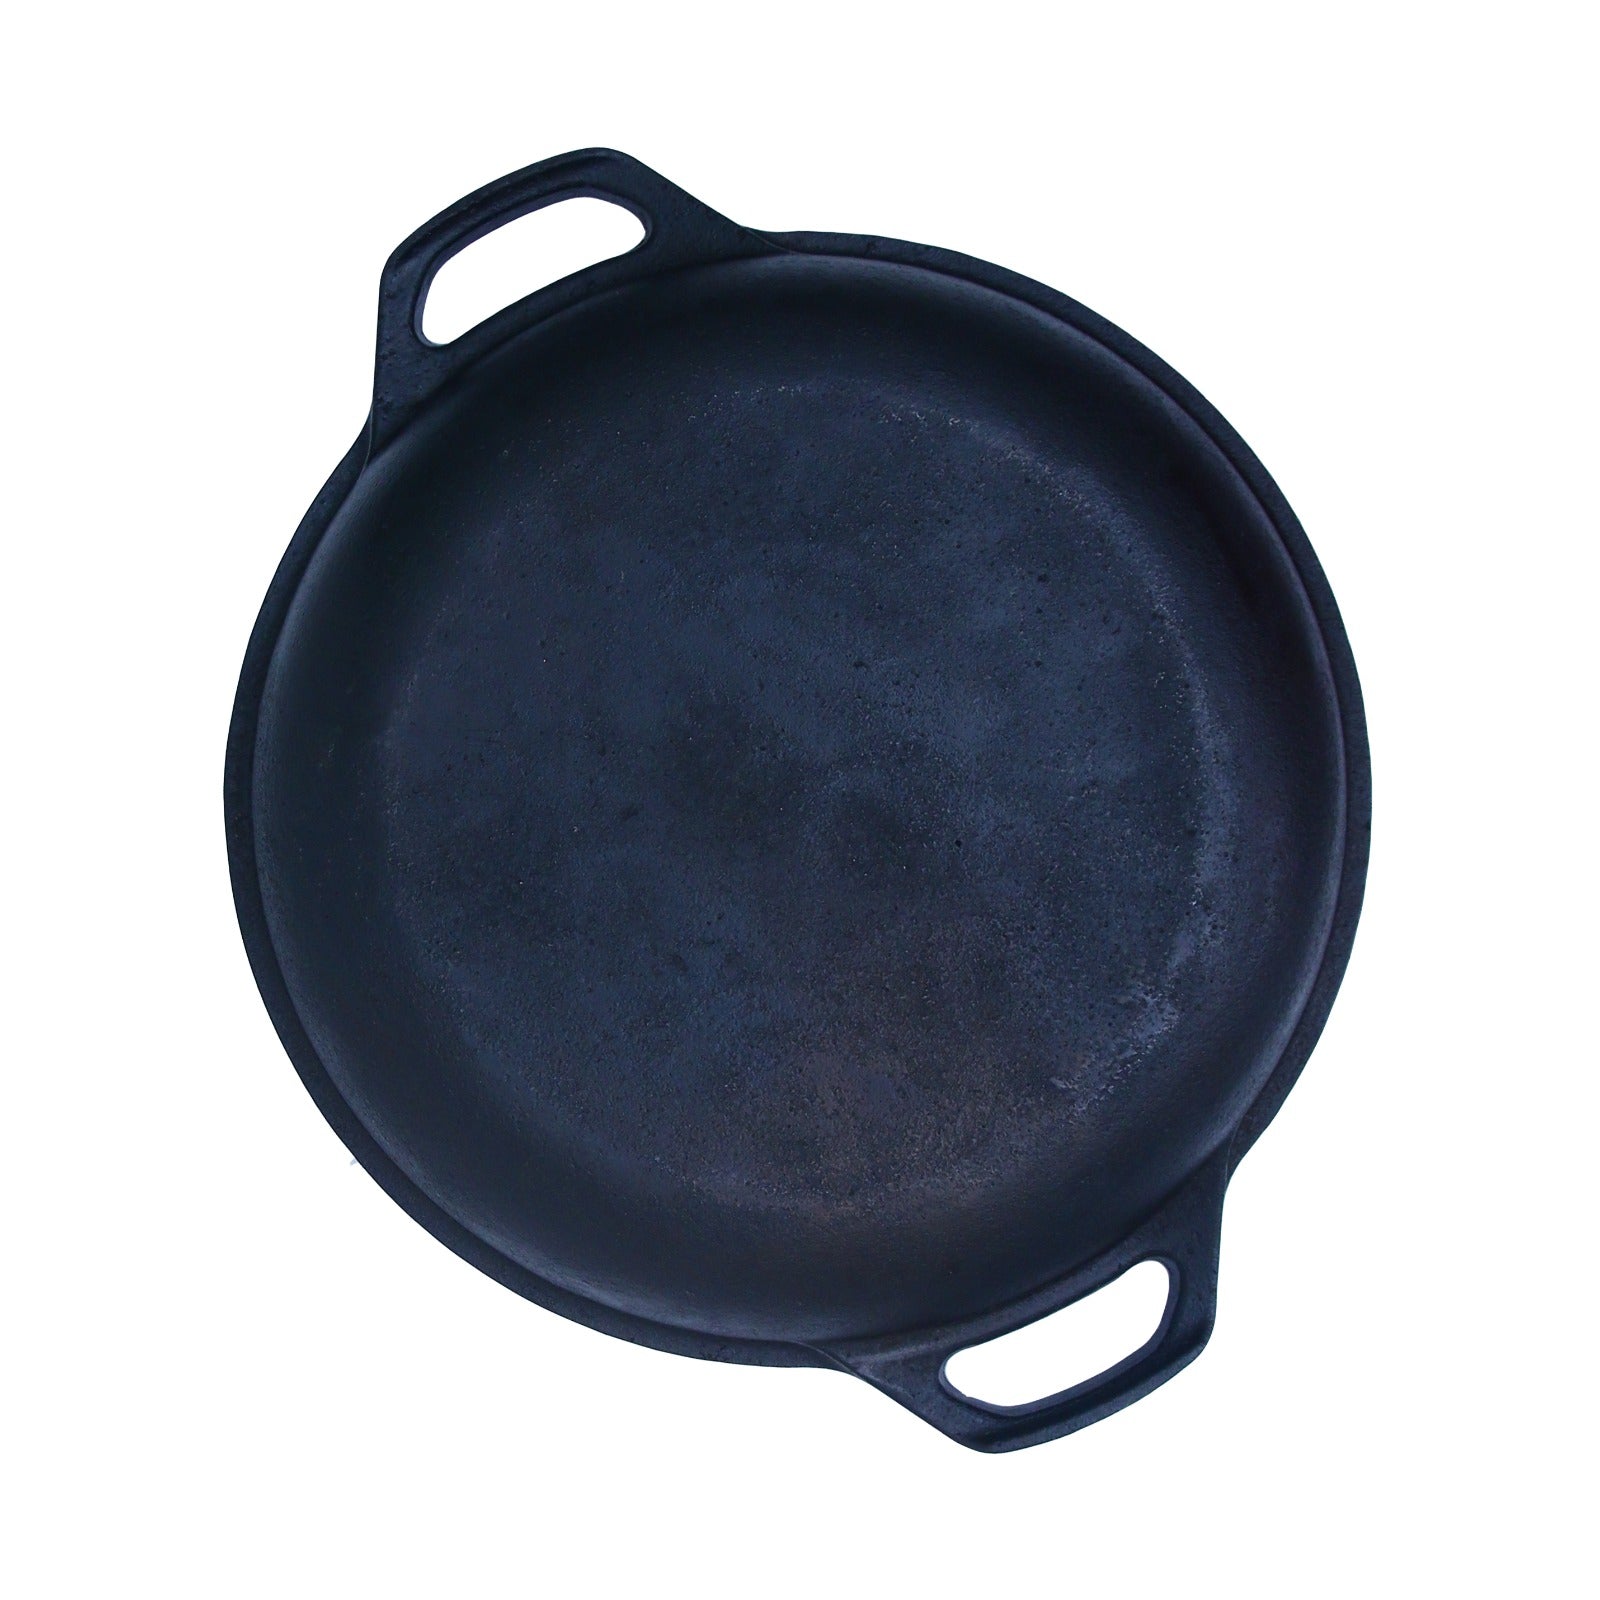 My 9.5-inch Nonstick Cast Iron Skillet is on SALE for a limited time on  @ Prime. All the benefits of cast iron cooking, none of the…